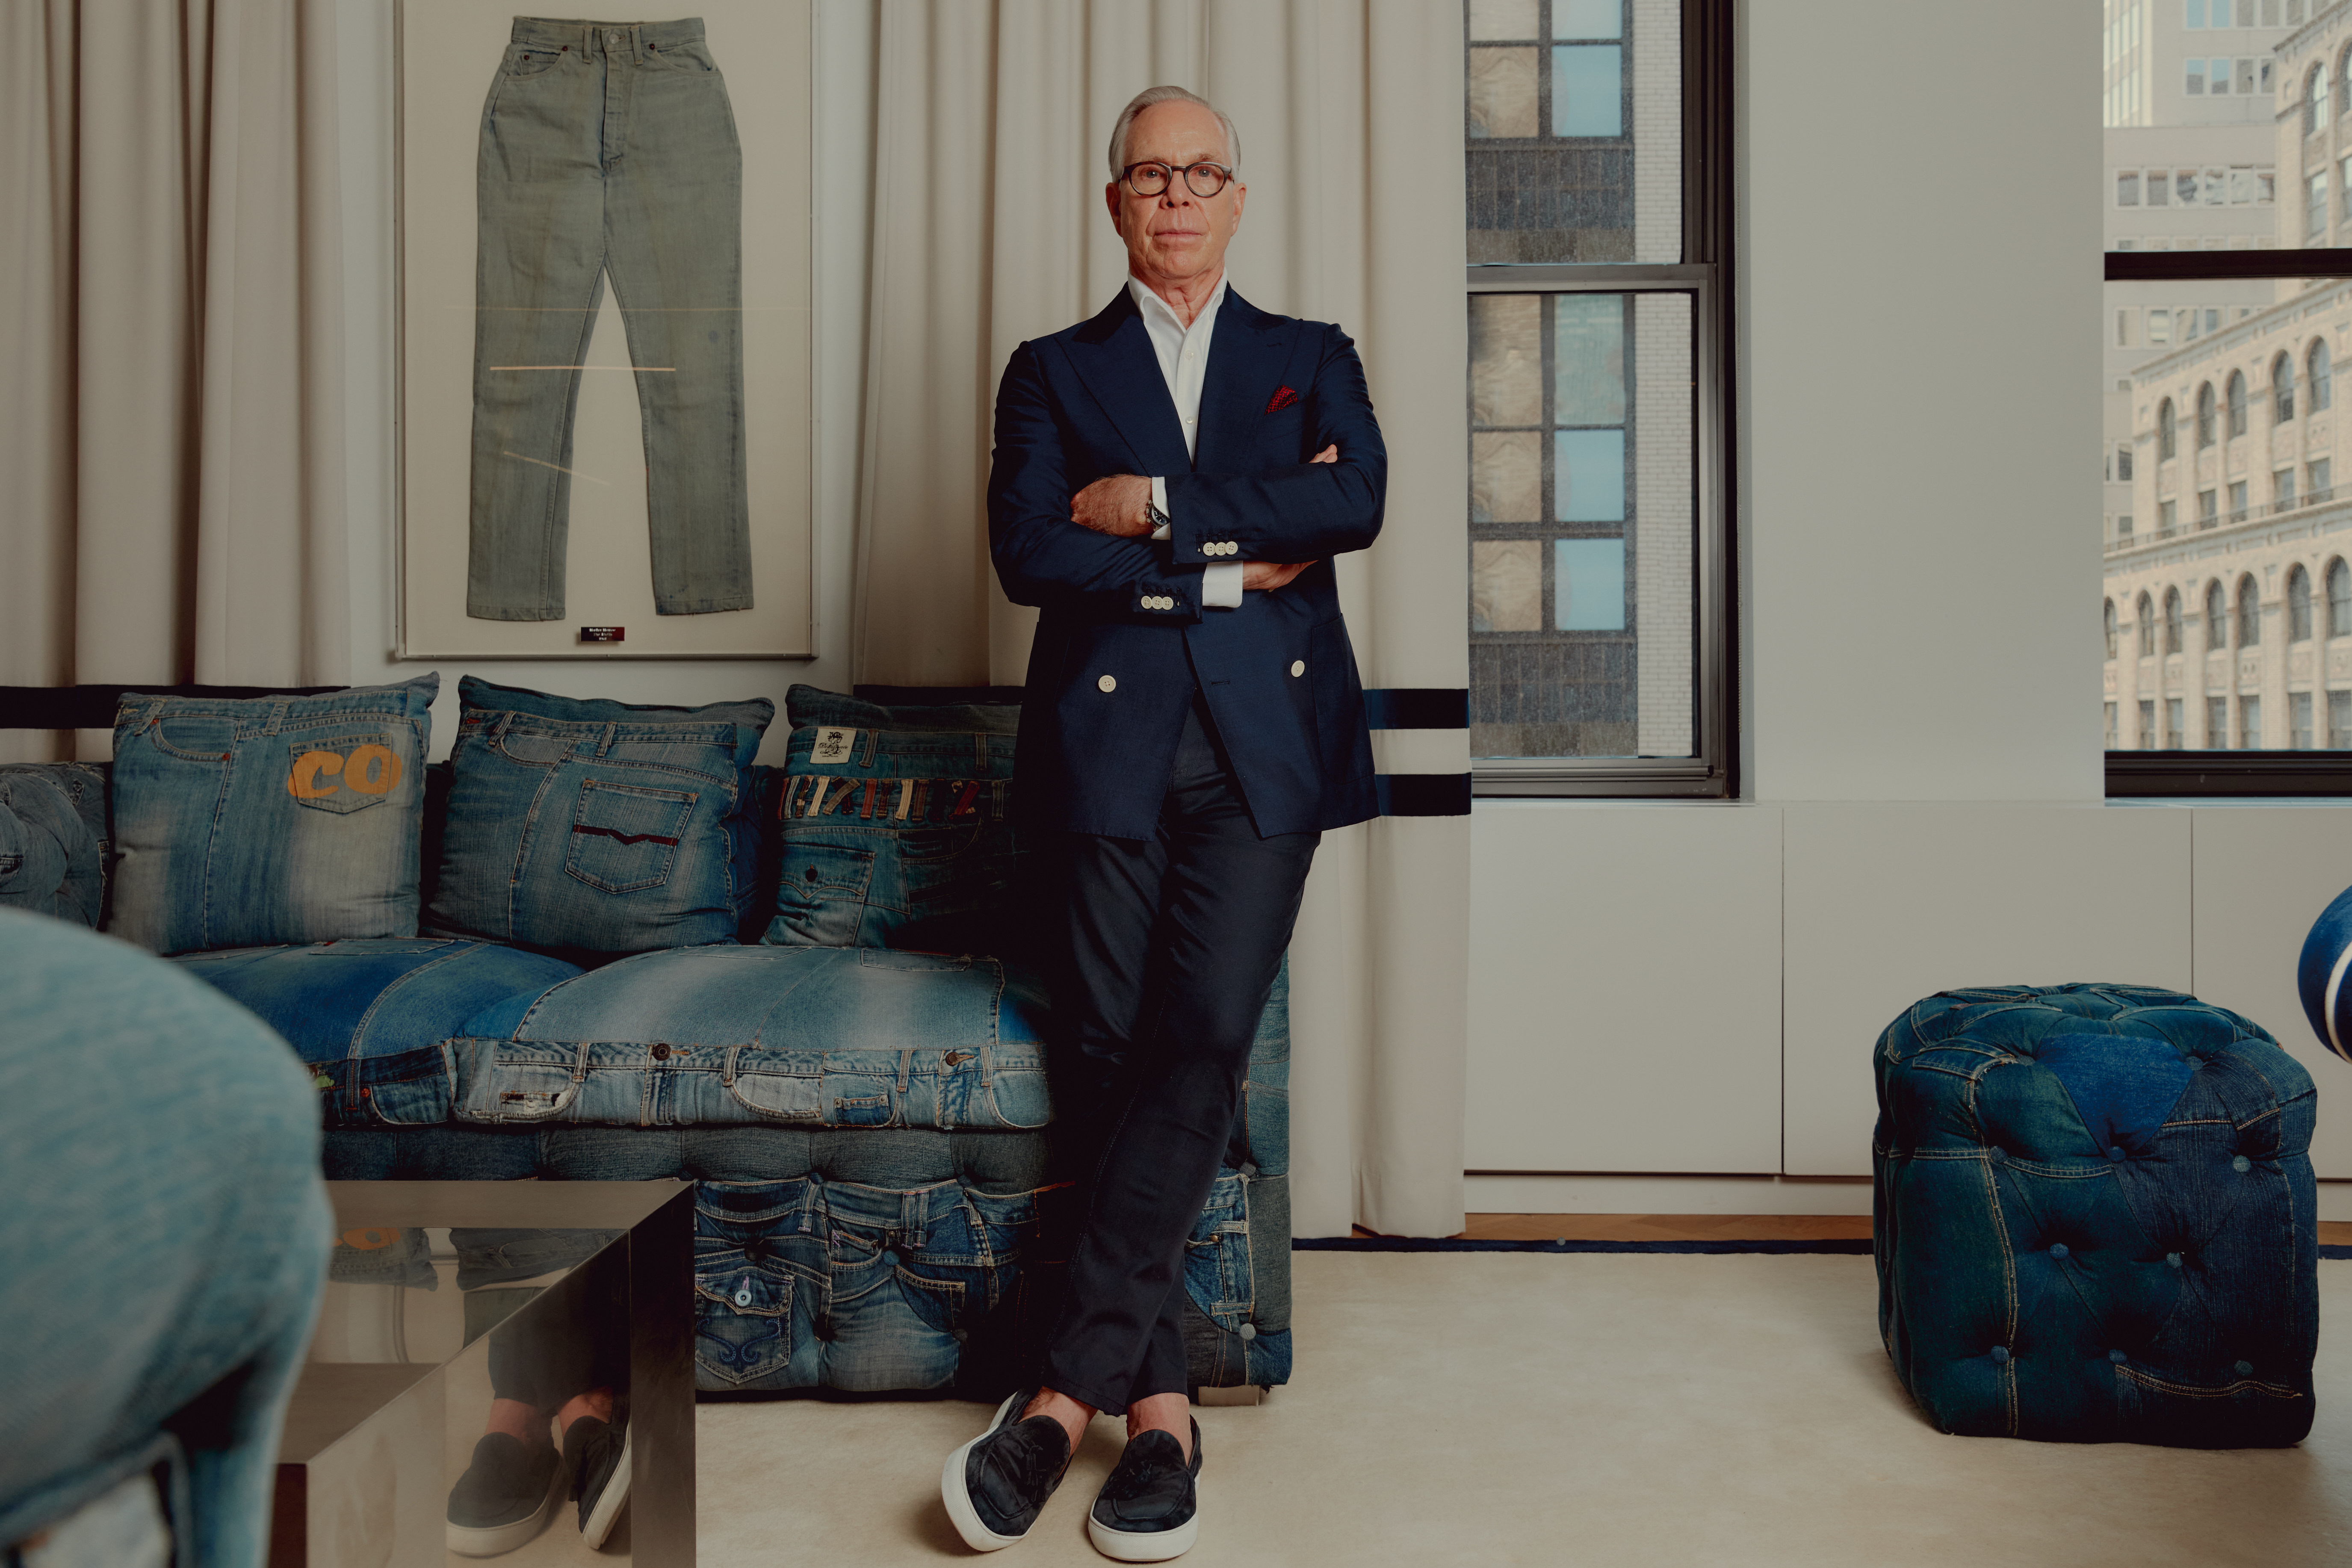 Tommy Hilfiger - Career, Fashion & Facts